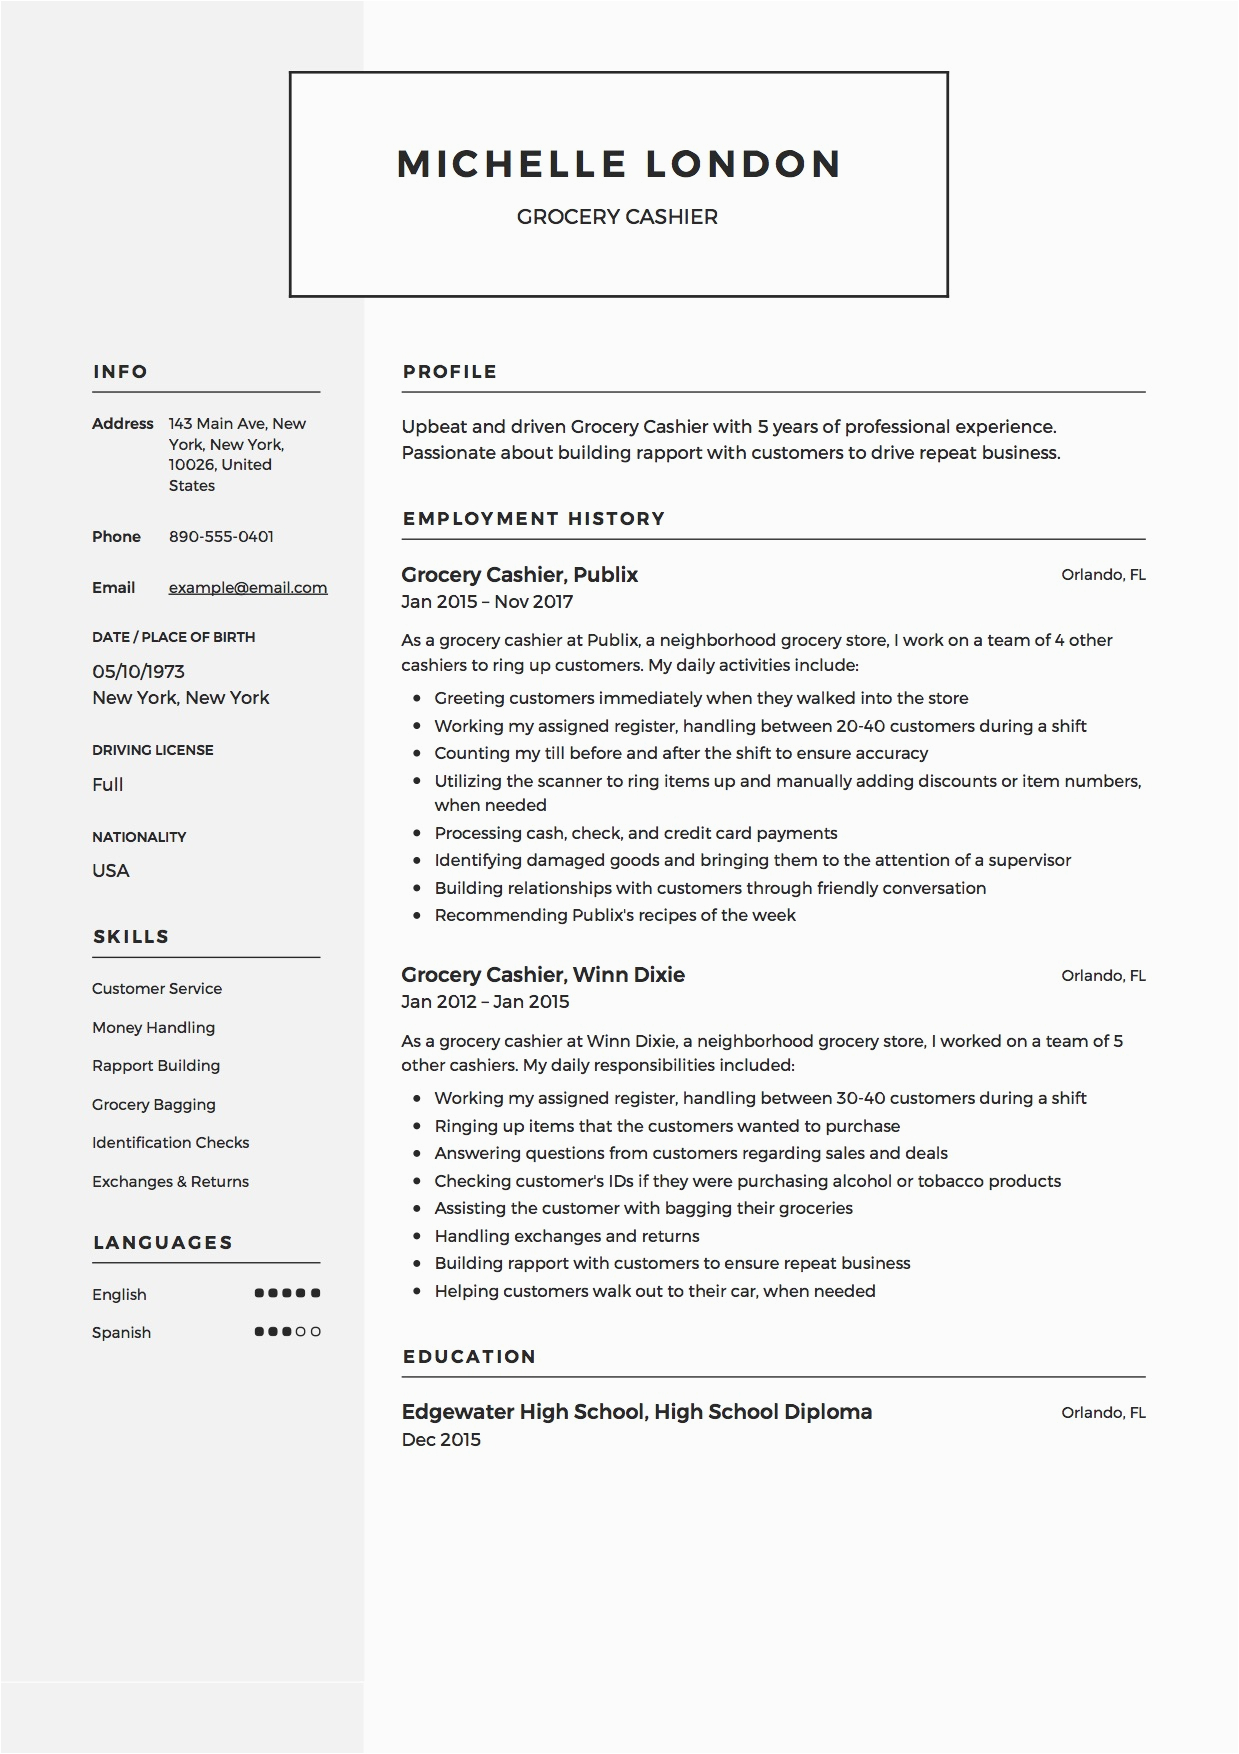 Cashier for Grocery Store Resume Sample Grocery Cashier Resume Guide 12 Example Pdf S